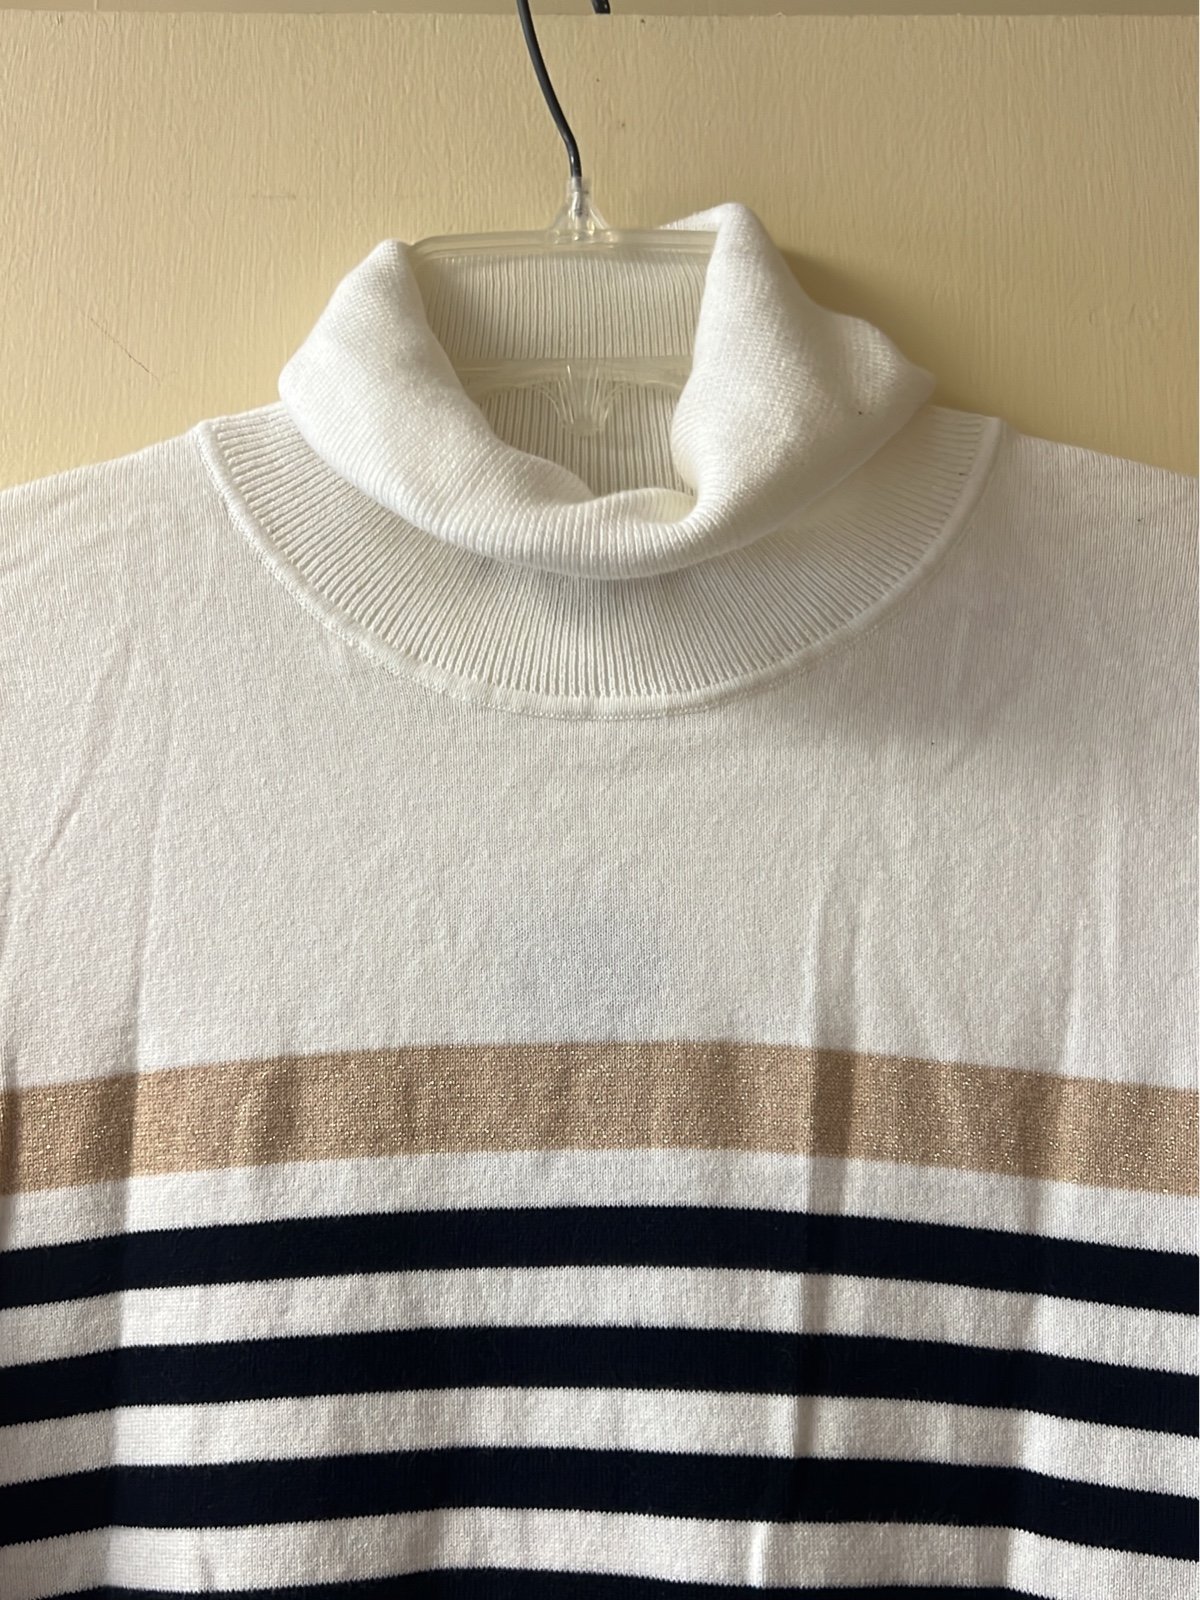 save up to 70% Tommy Hilfiger Sweater XL MON5pD920 Great